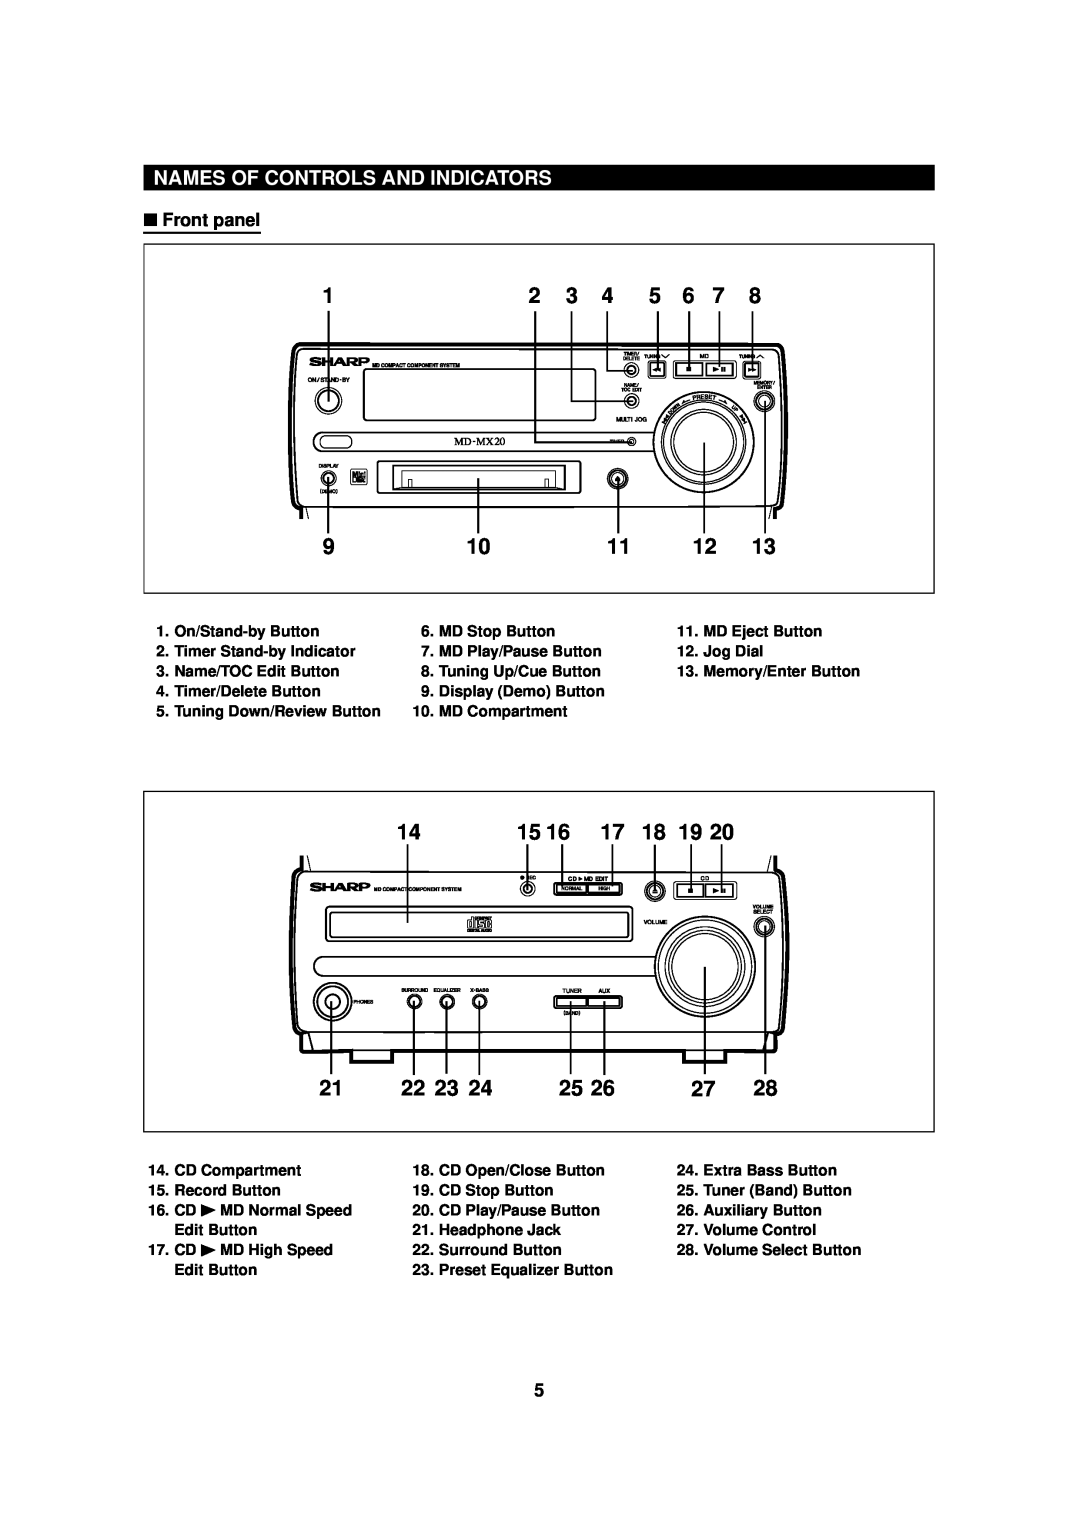 Sharp MD-MX20 operation manual Names Of Controls And Indicators, Front panel 